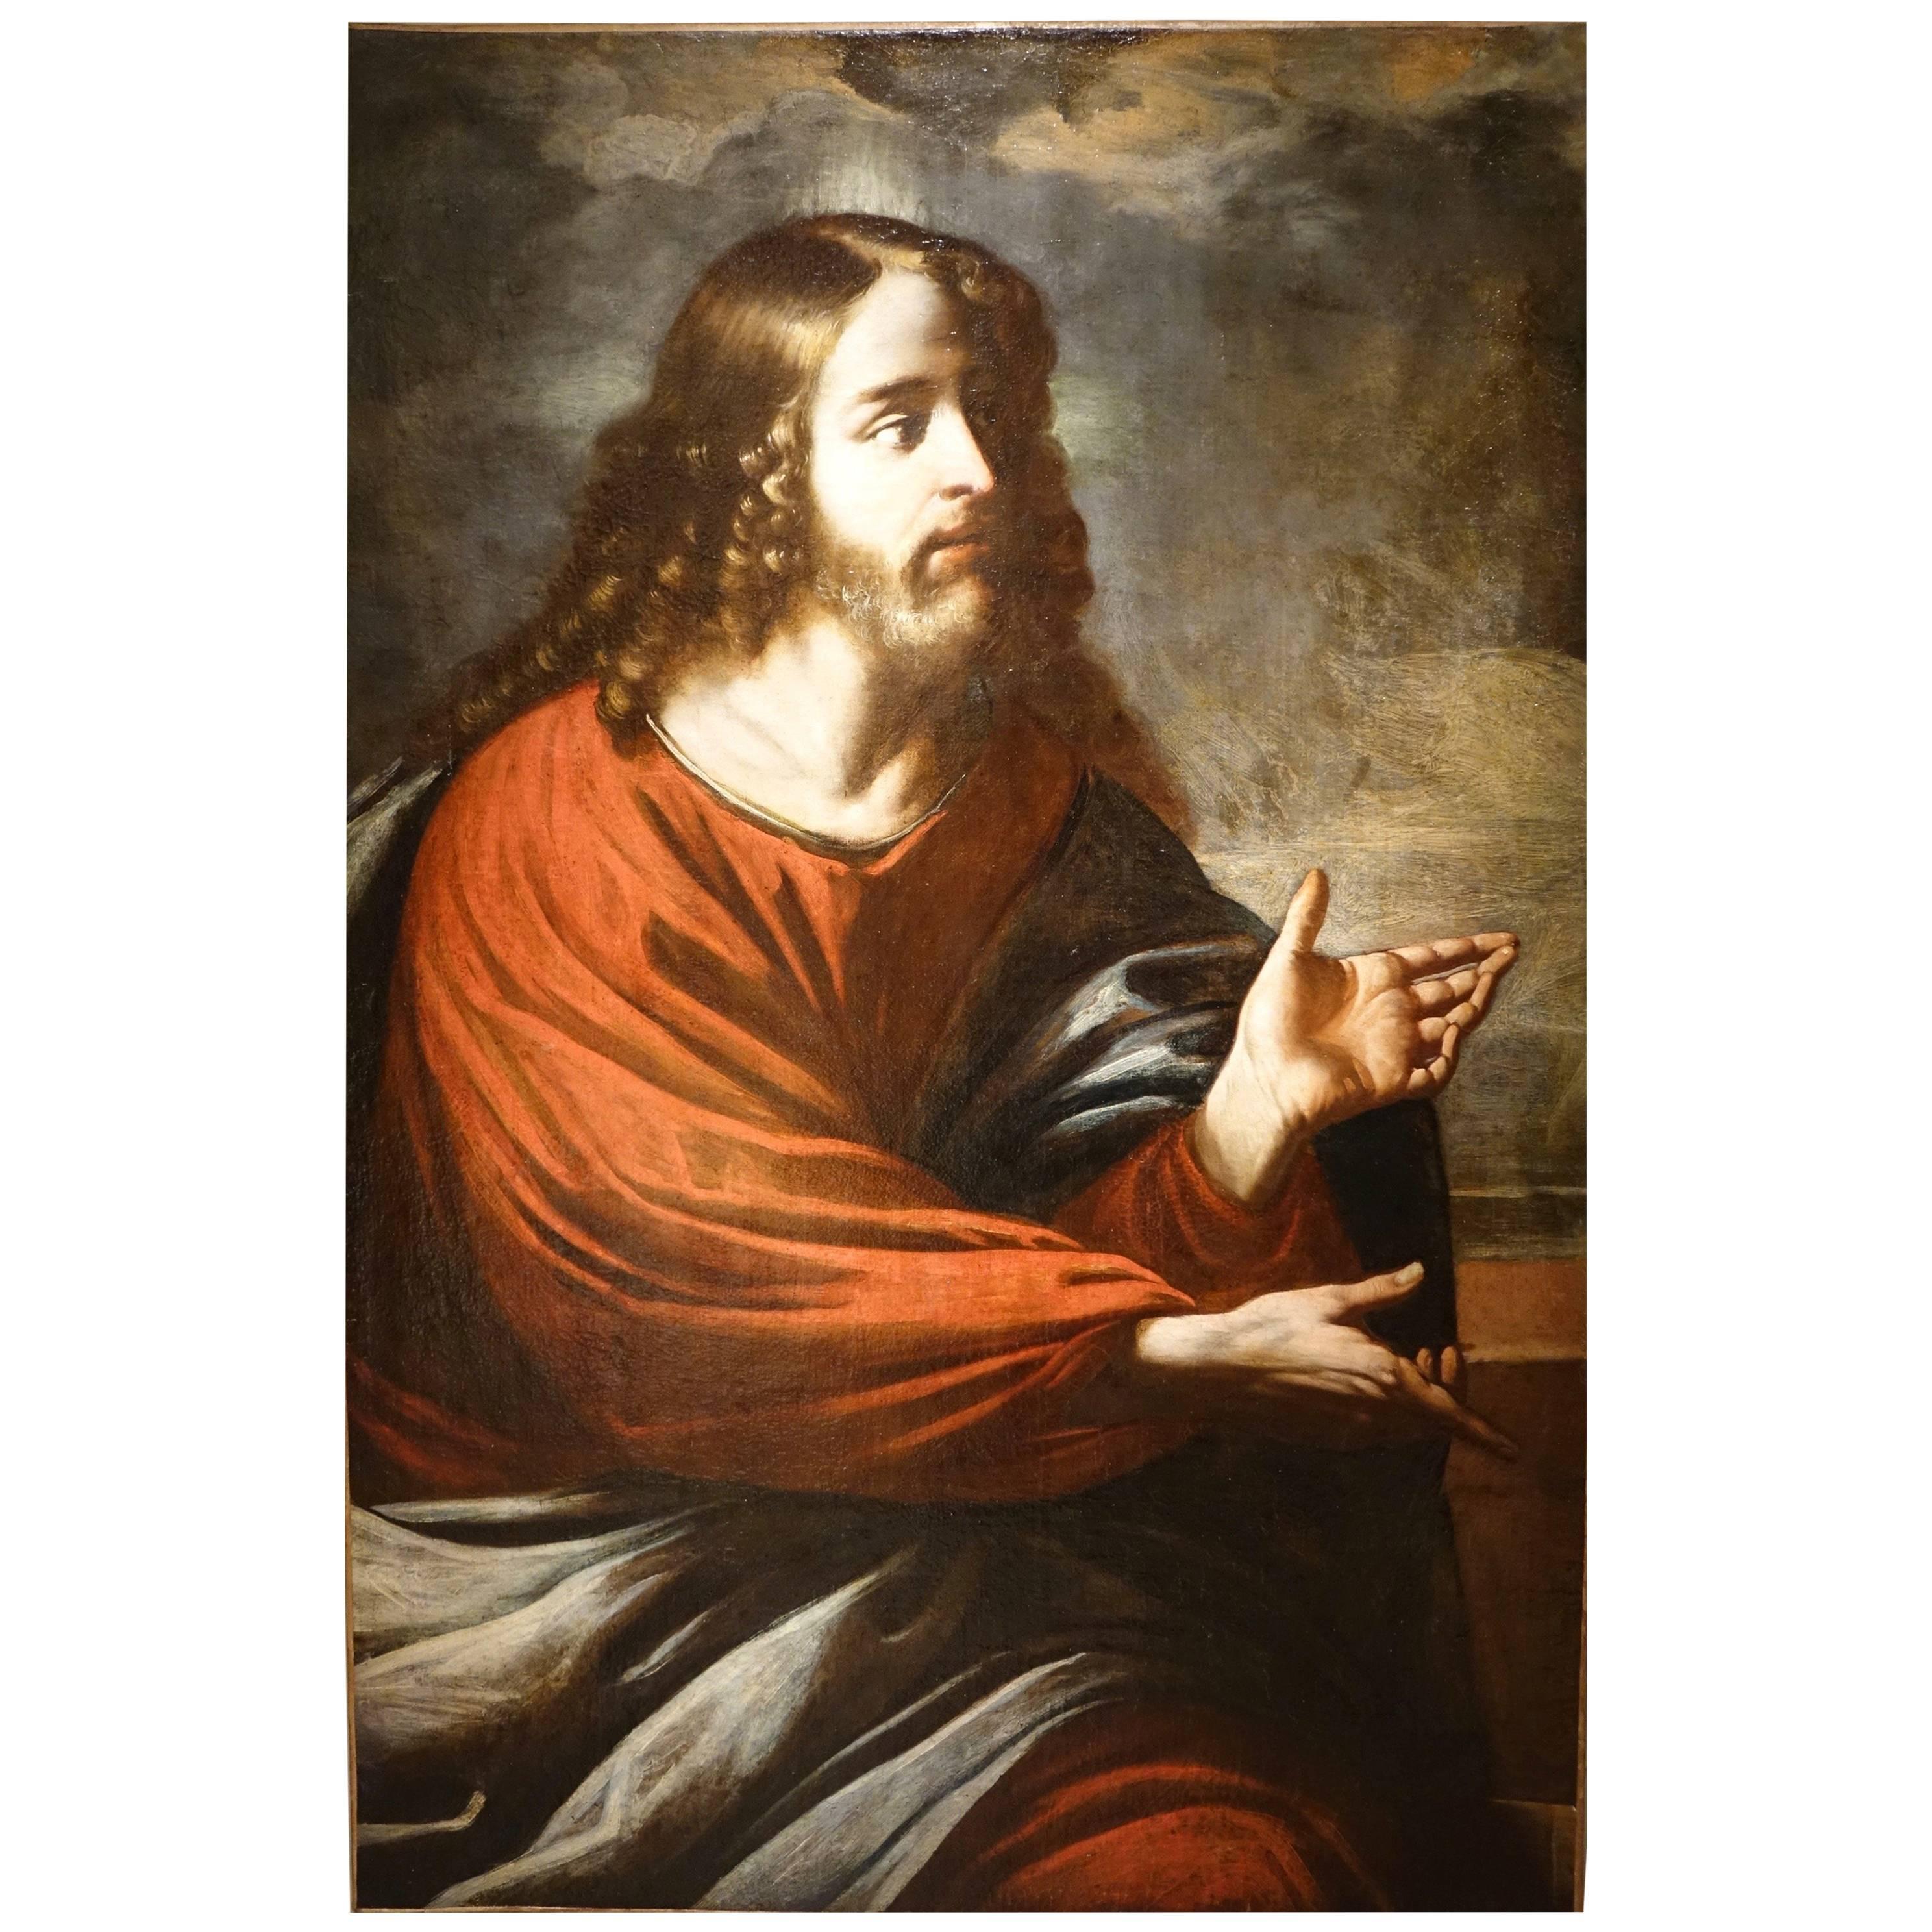 Christ preaching before a stormy, threatening sky.
Oil on canvas.School of Ferrara, in the circle of G.Francesco Barbieri, circa 1620. 
Italian School 
Beautiful 17th century frame mecca gilt wood 
He seems to be sitting, pointing his index,